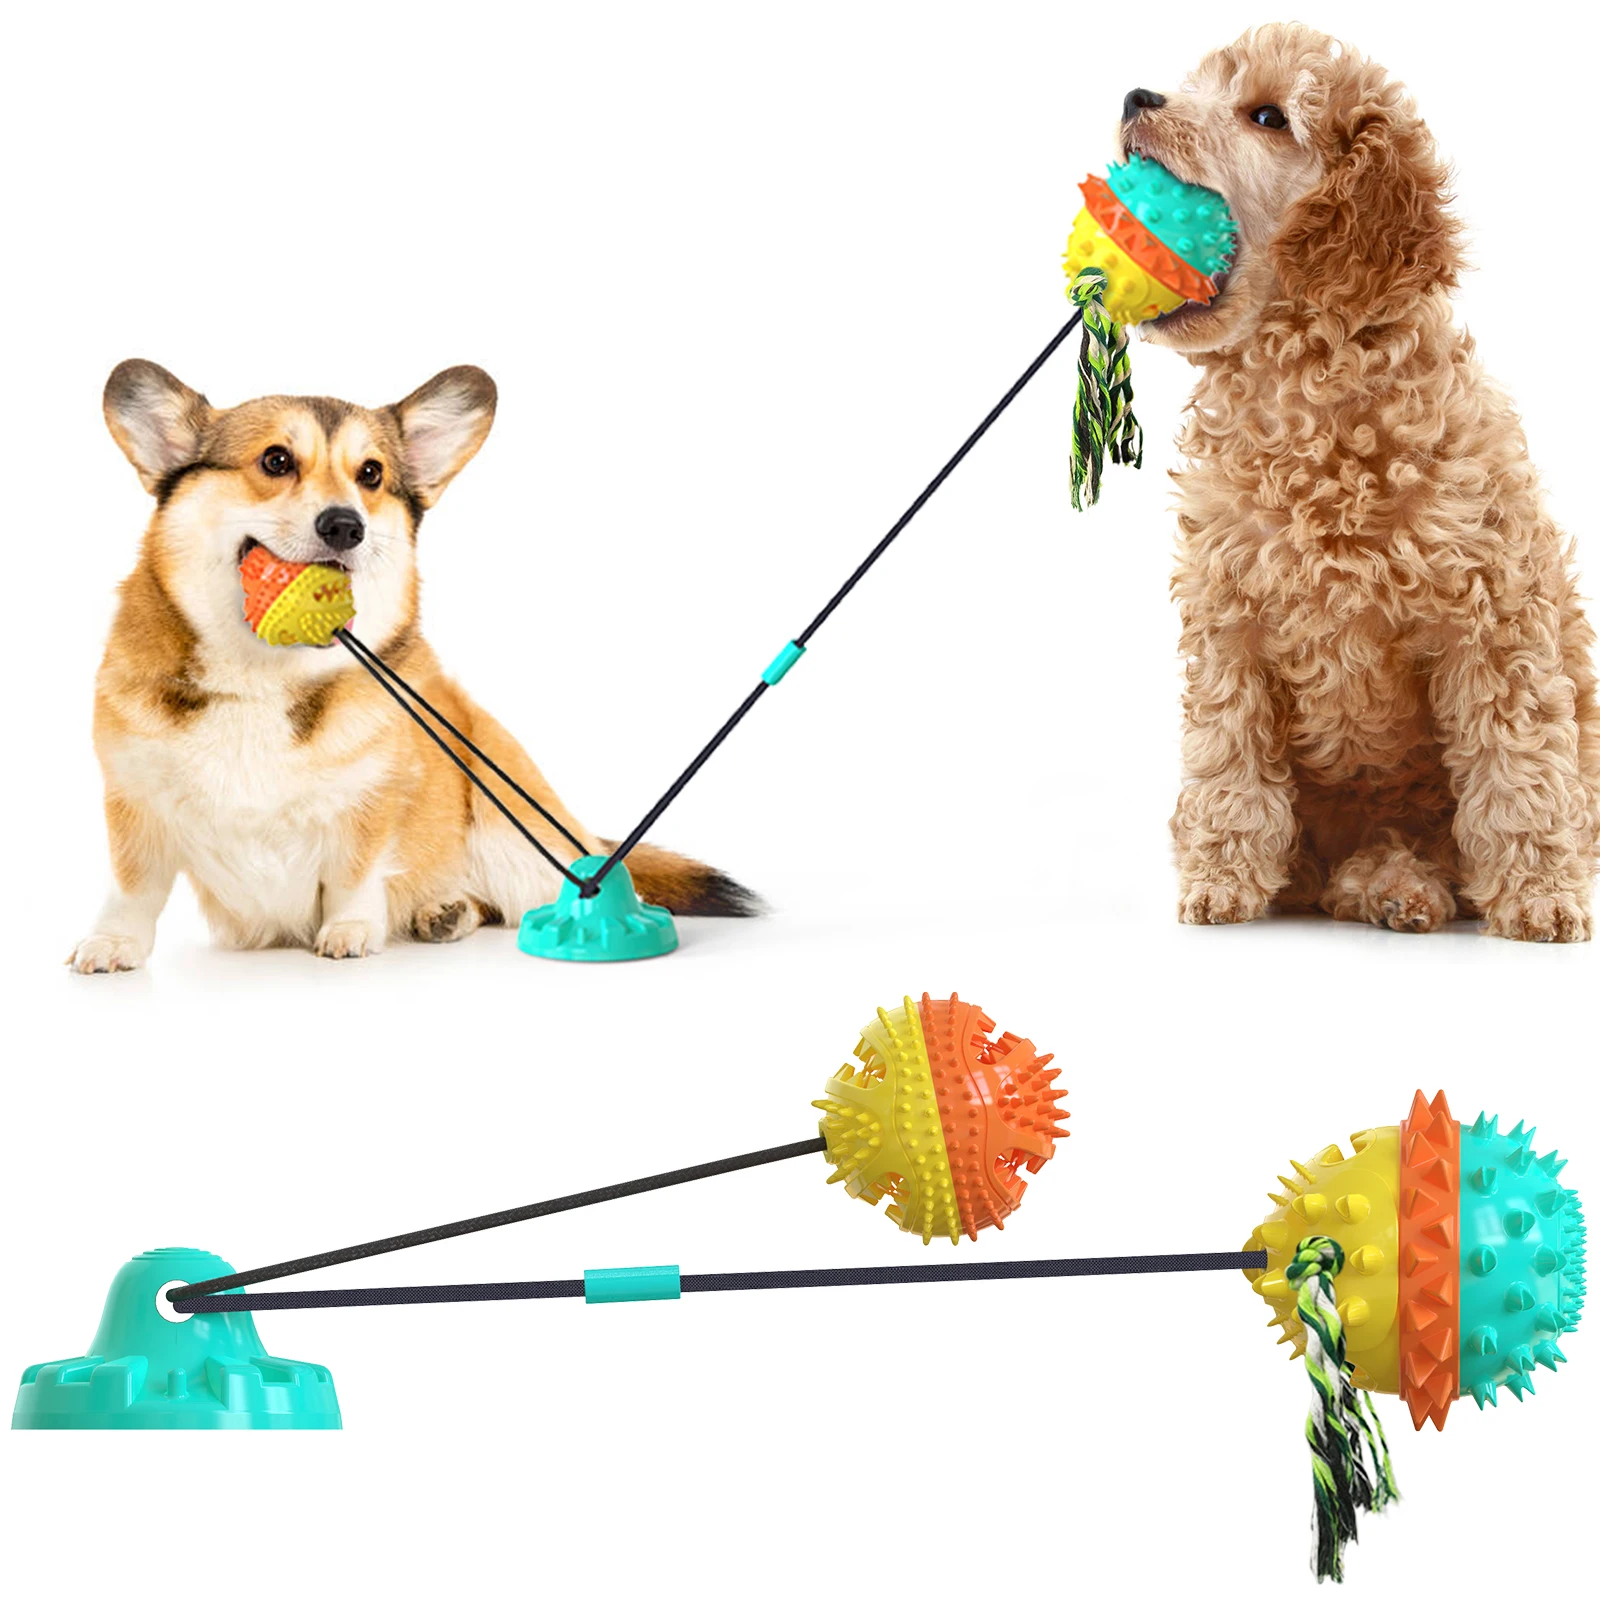 

Dog Interactive Toys Bite Resistant TPR Rubber Chew Sucker Pet Molar Squeaky Ball Toy Puppy Pull Game Toothbrush For Large Dogs